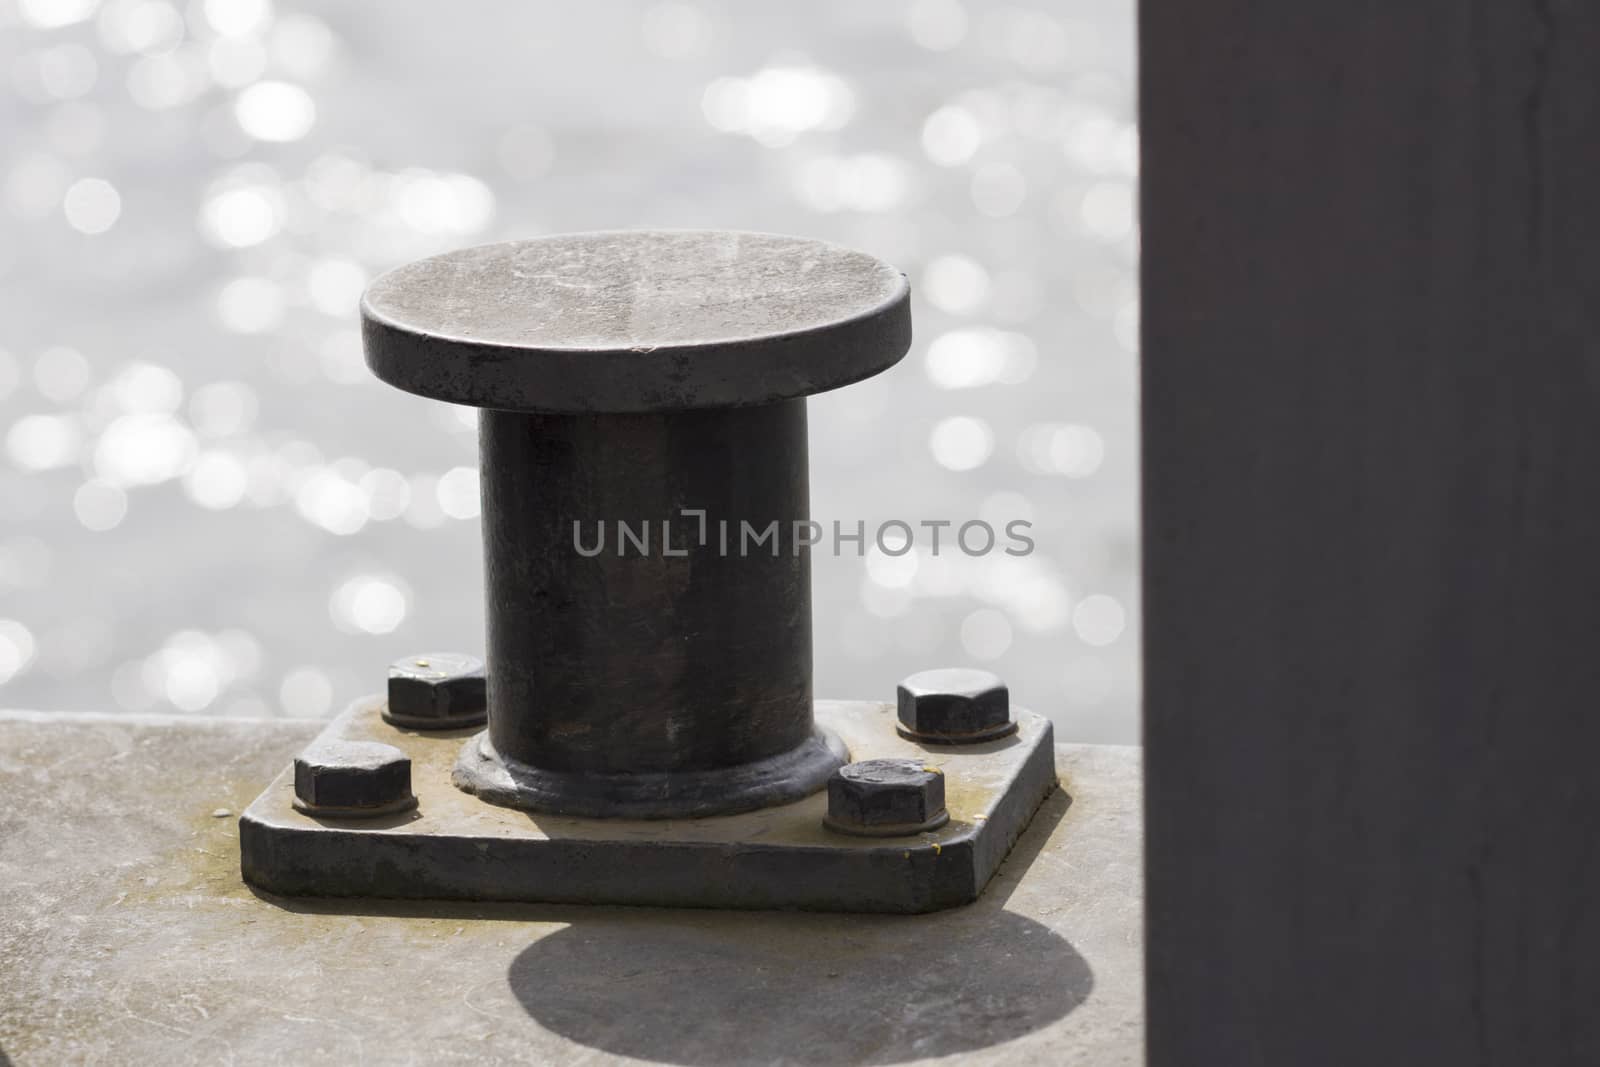 Bollard with water in background